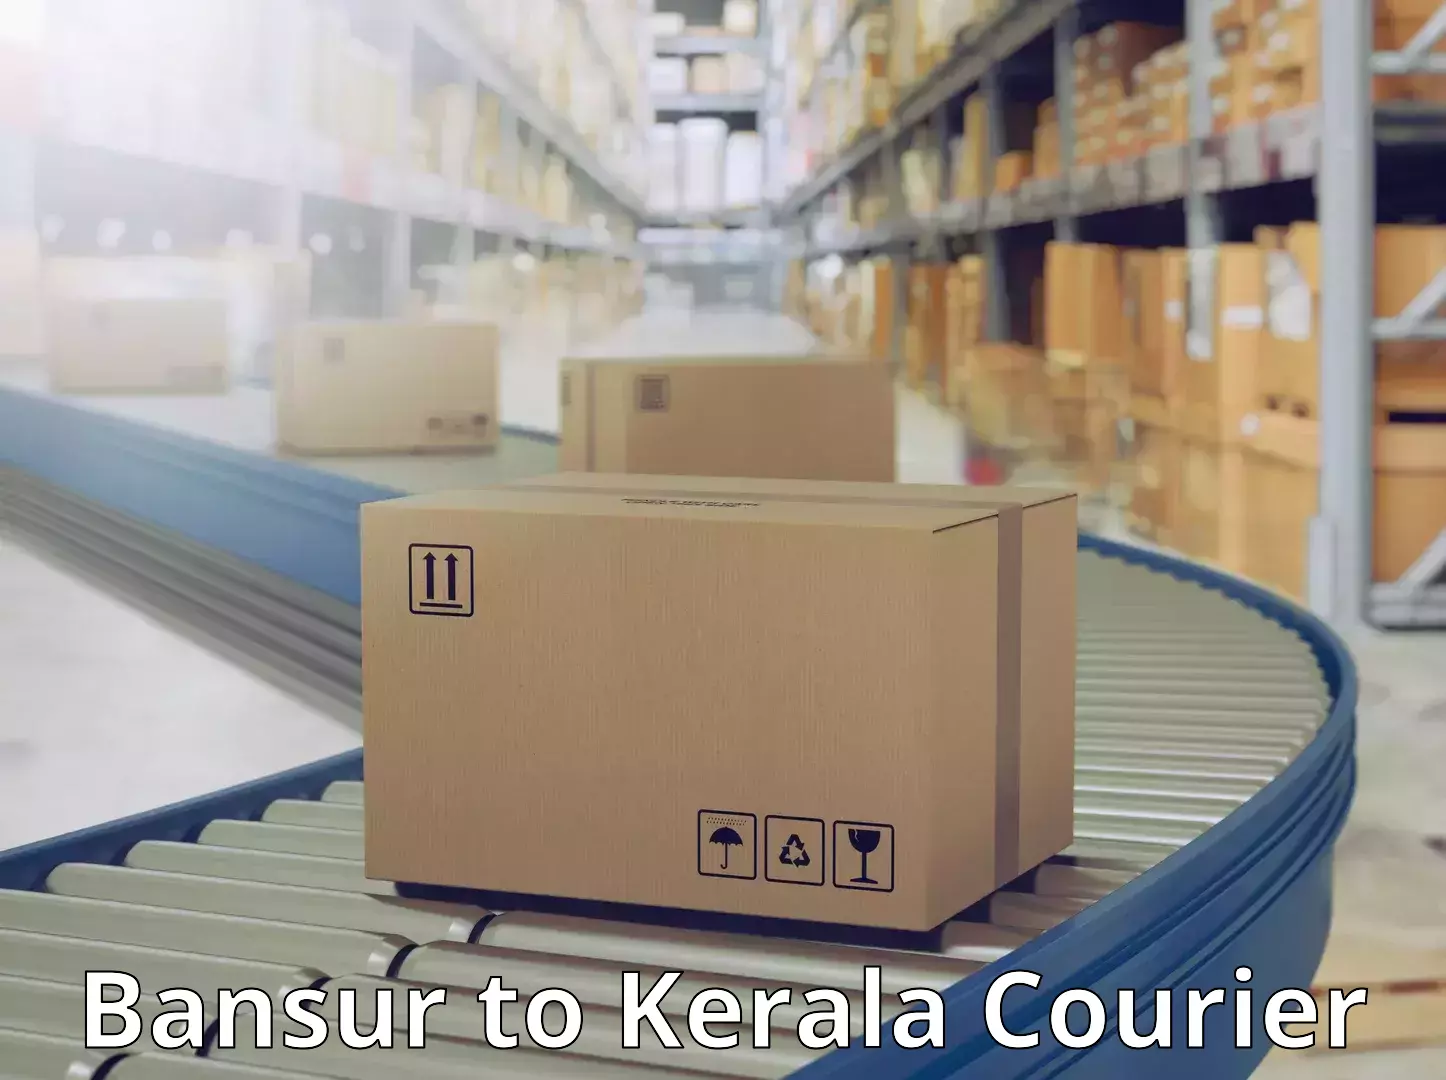 Quality courier services in Bansur to Kerala